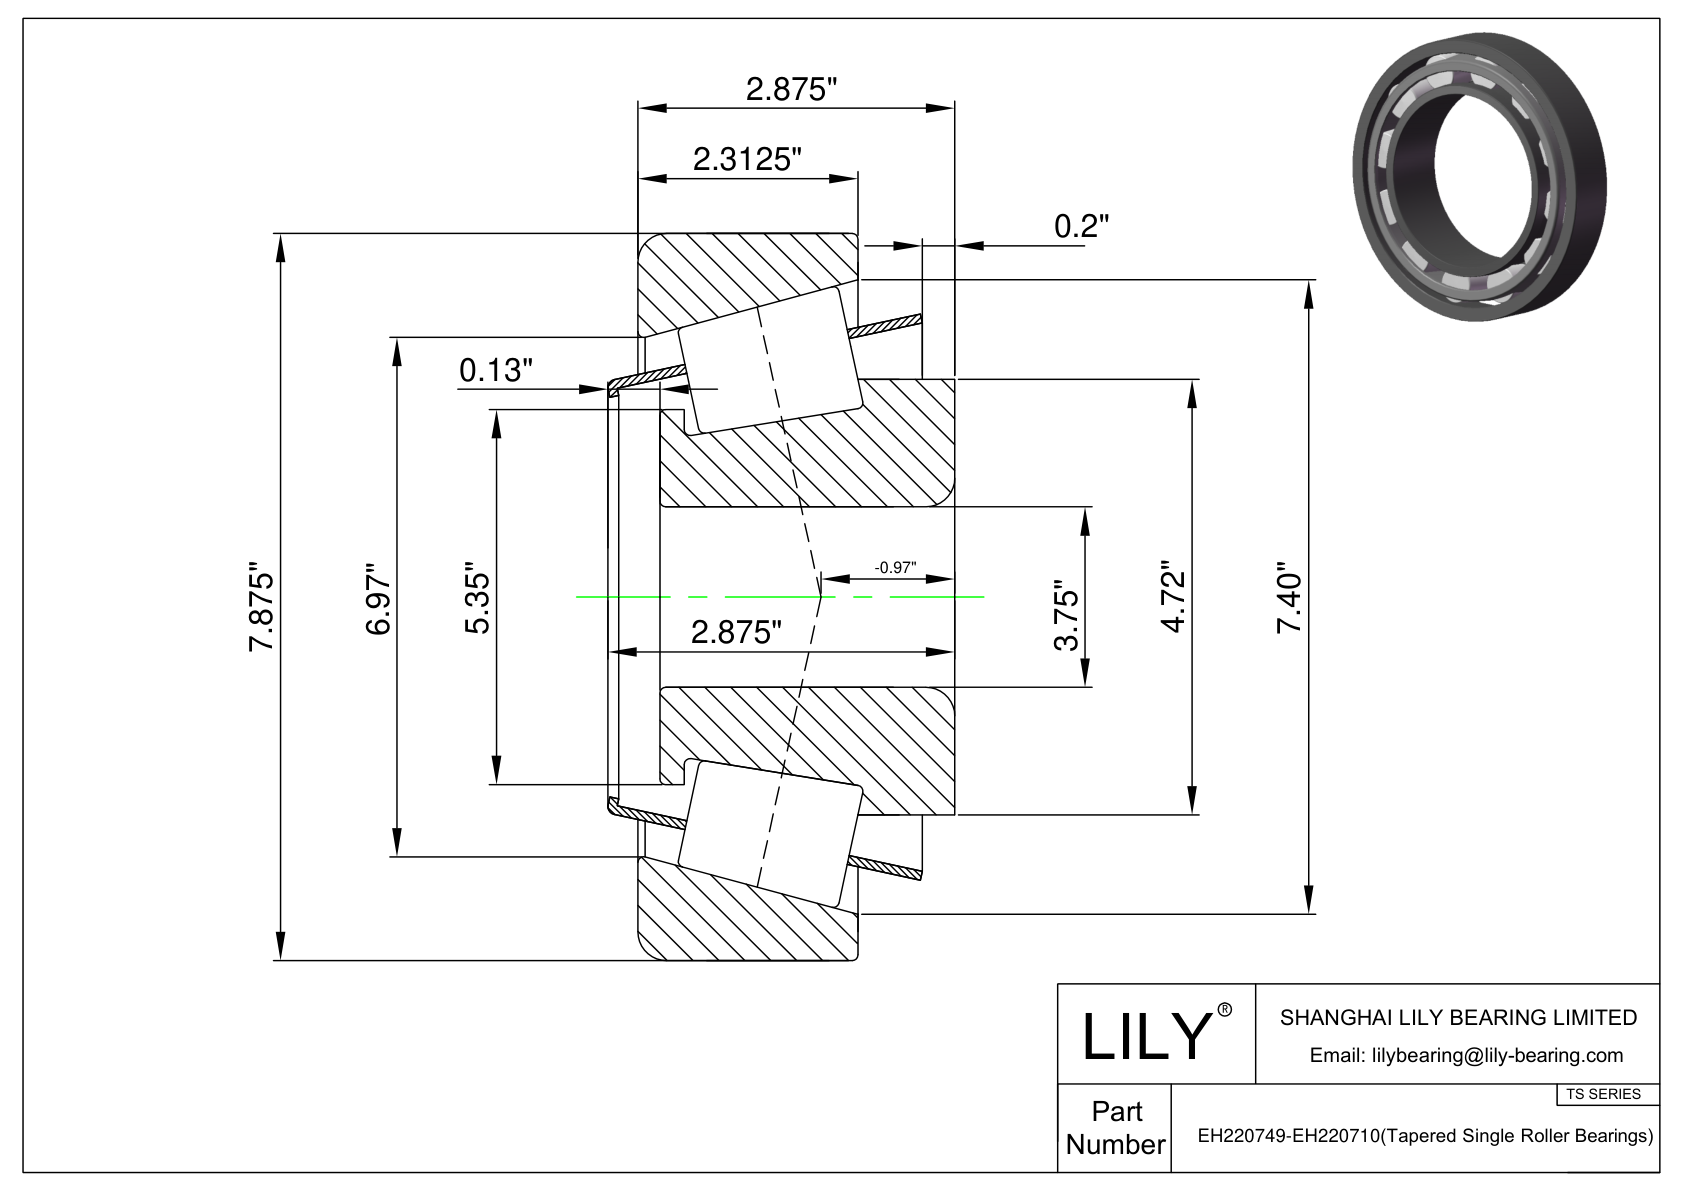 EH220749-EH220710 TS (Tapered Single Roller Bearings) (Imperial) cad drawing